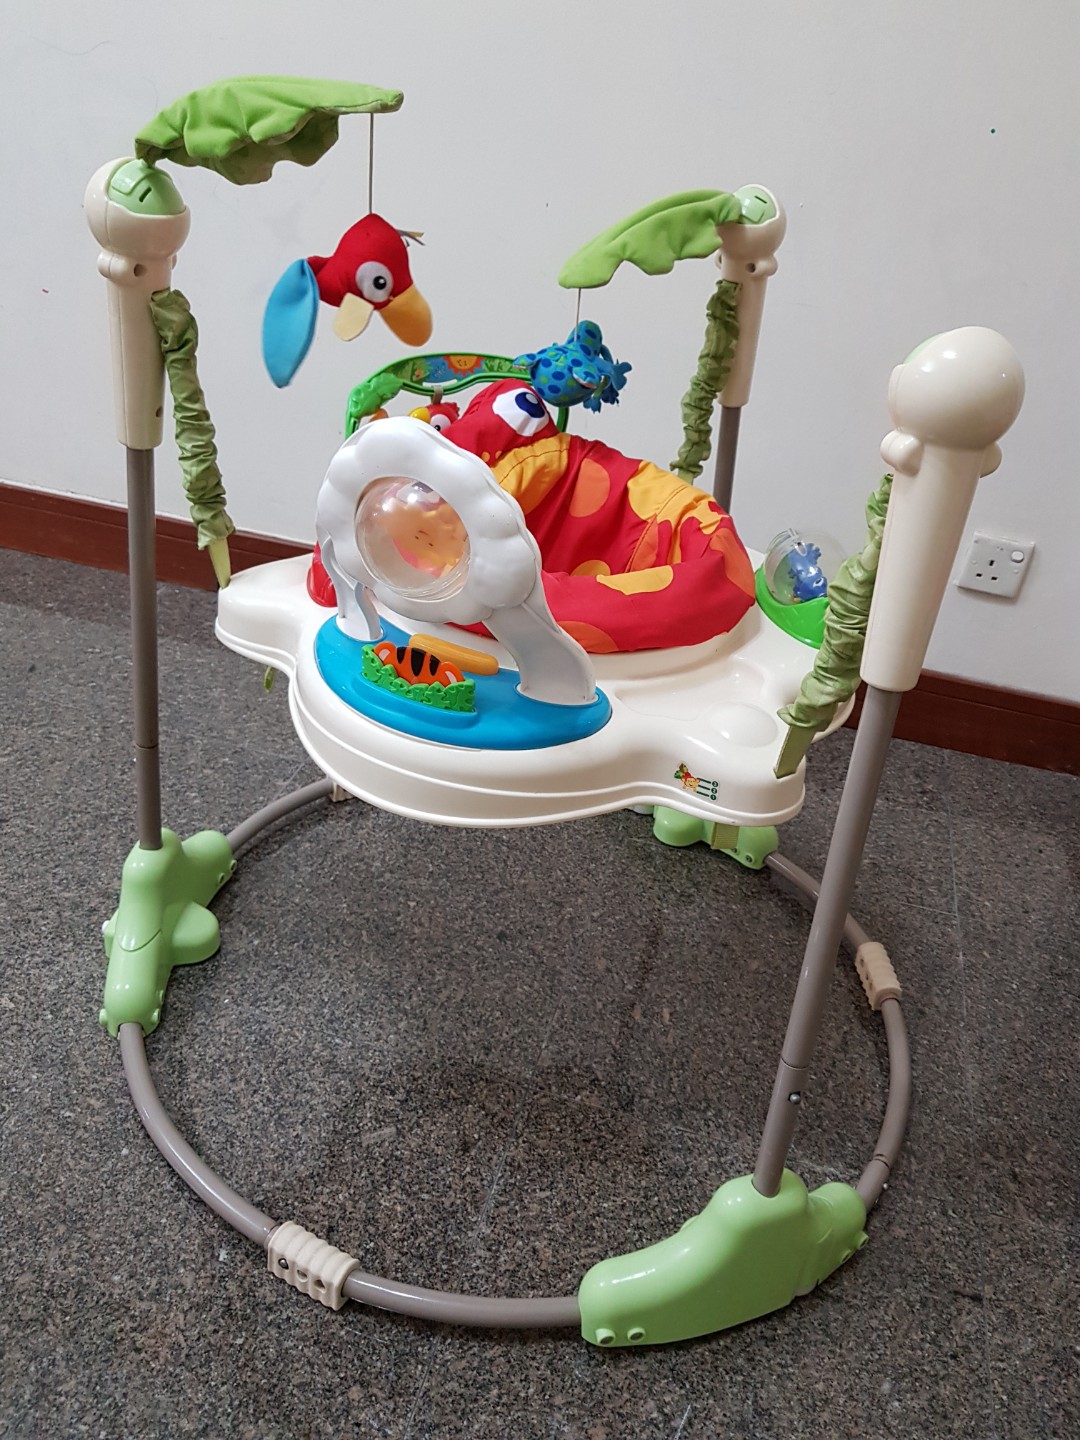 Fisher Price Jumperoo 1528691222 6e83bd7a 